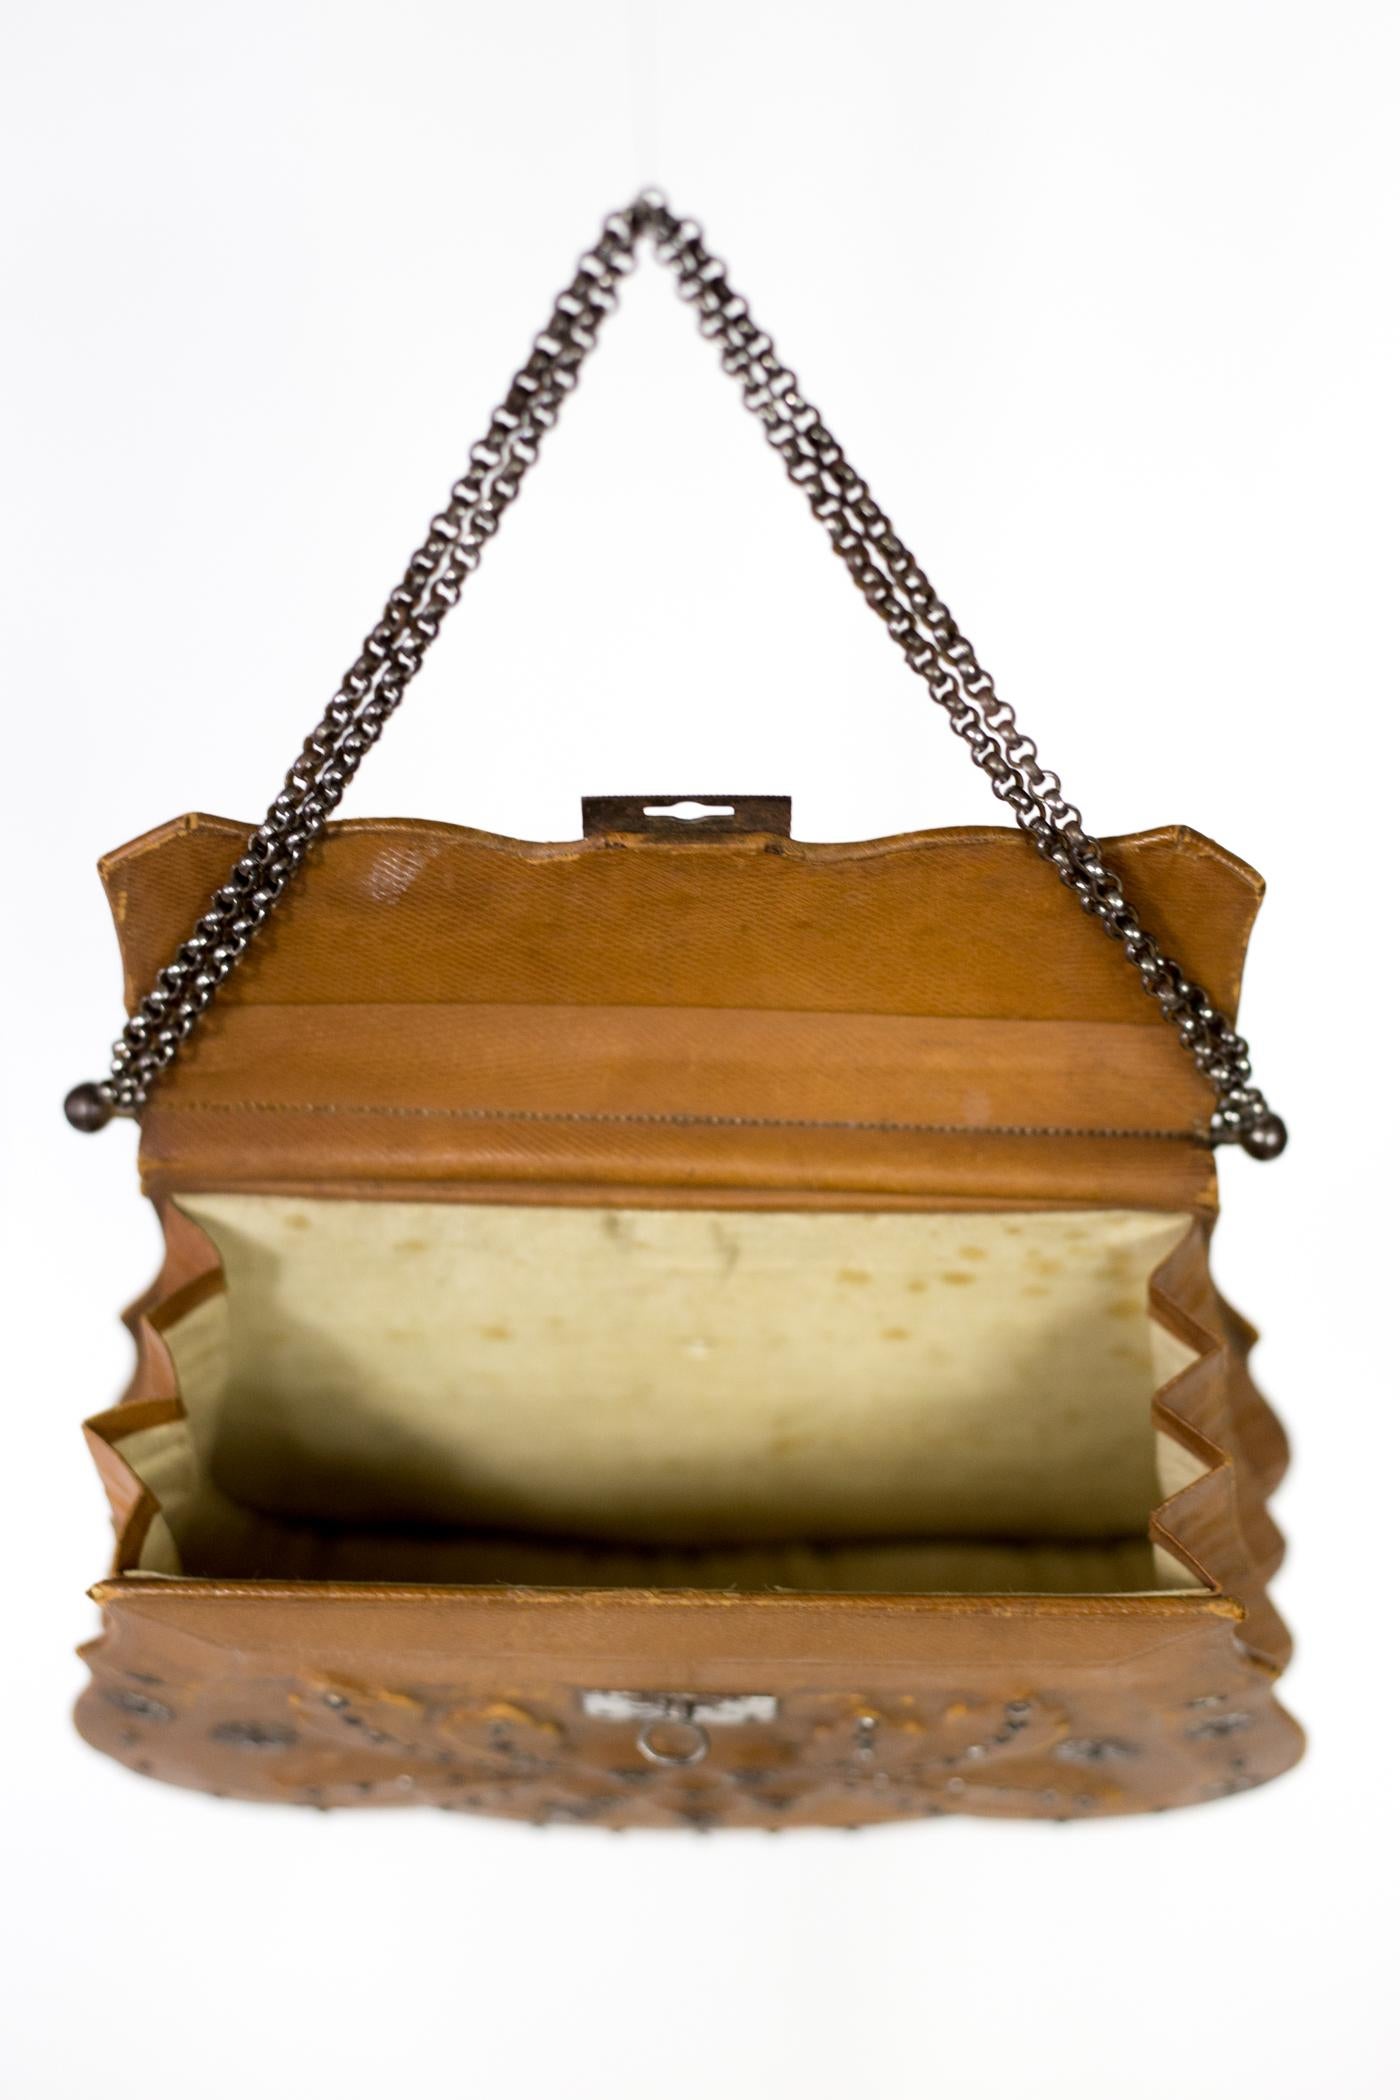 A French Empire Reticule in Leather and Steel beads - France Circa 1795-1815 For Sale 6